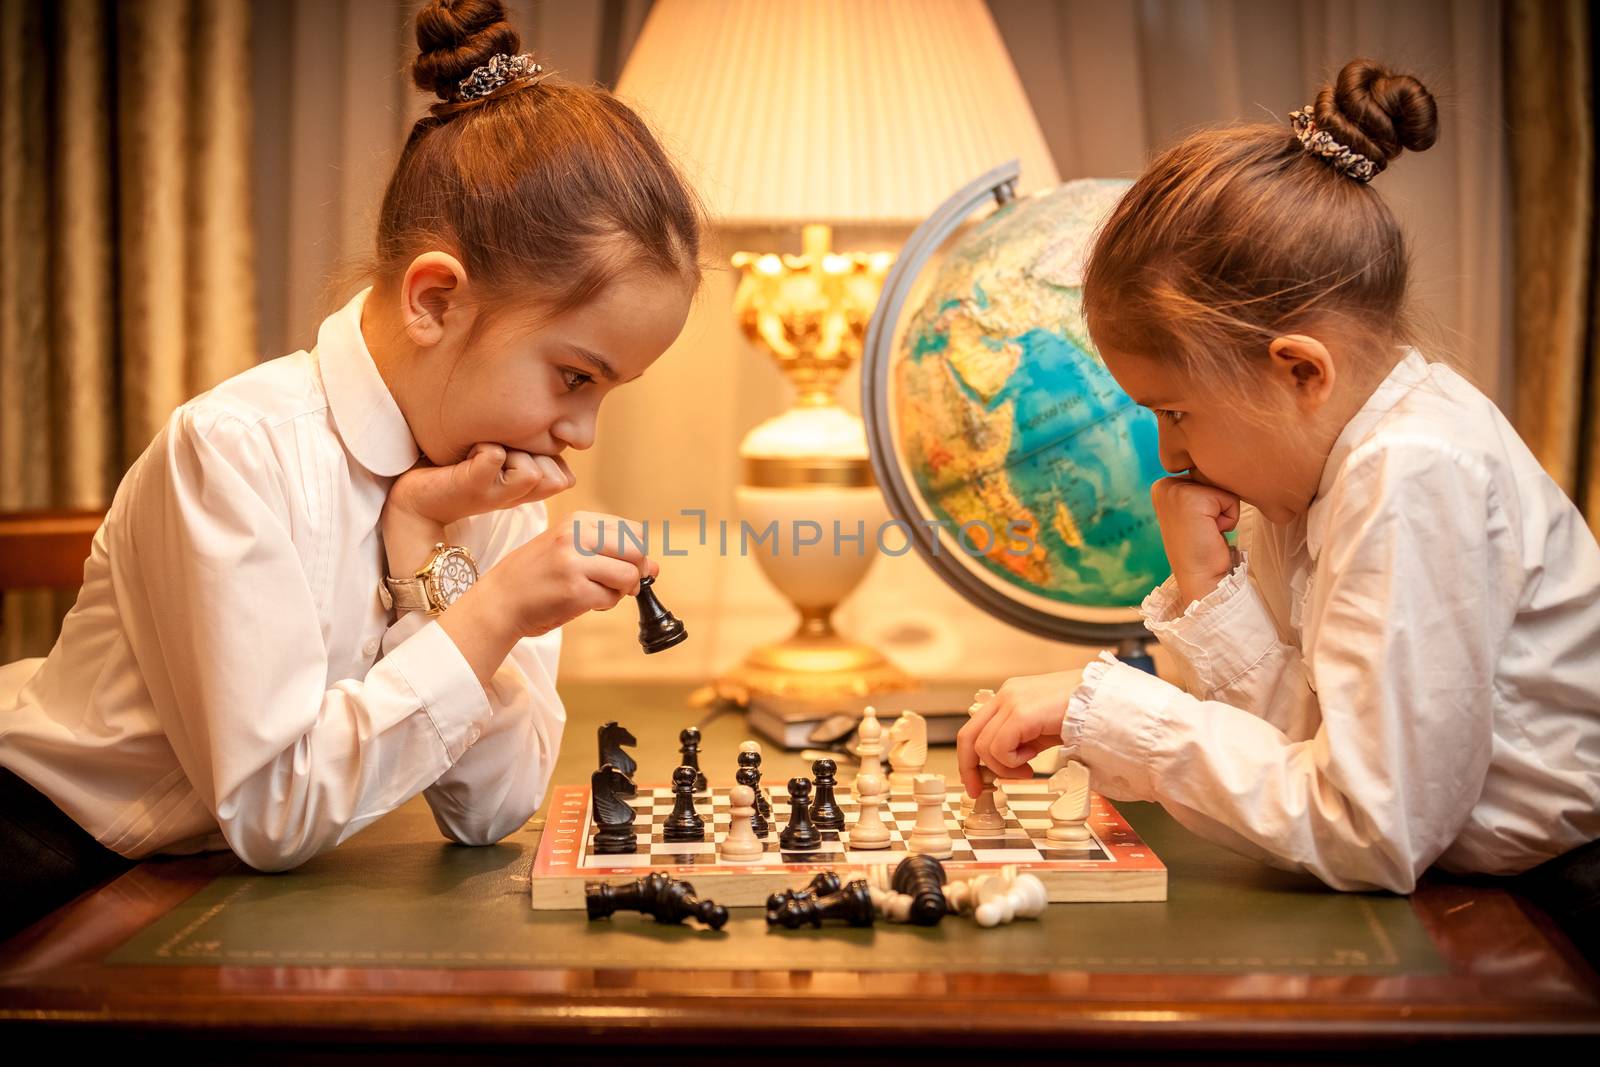 Sisters playing chess by Kryzhov